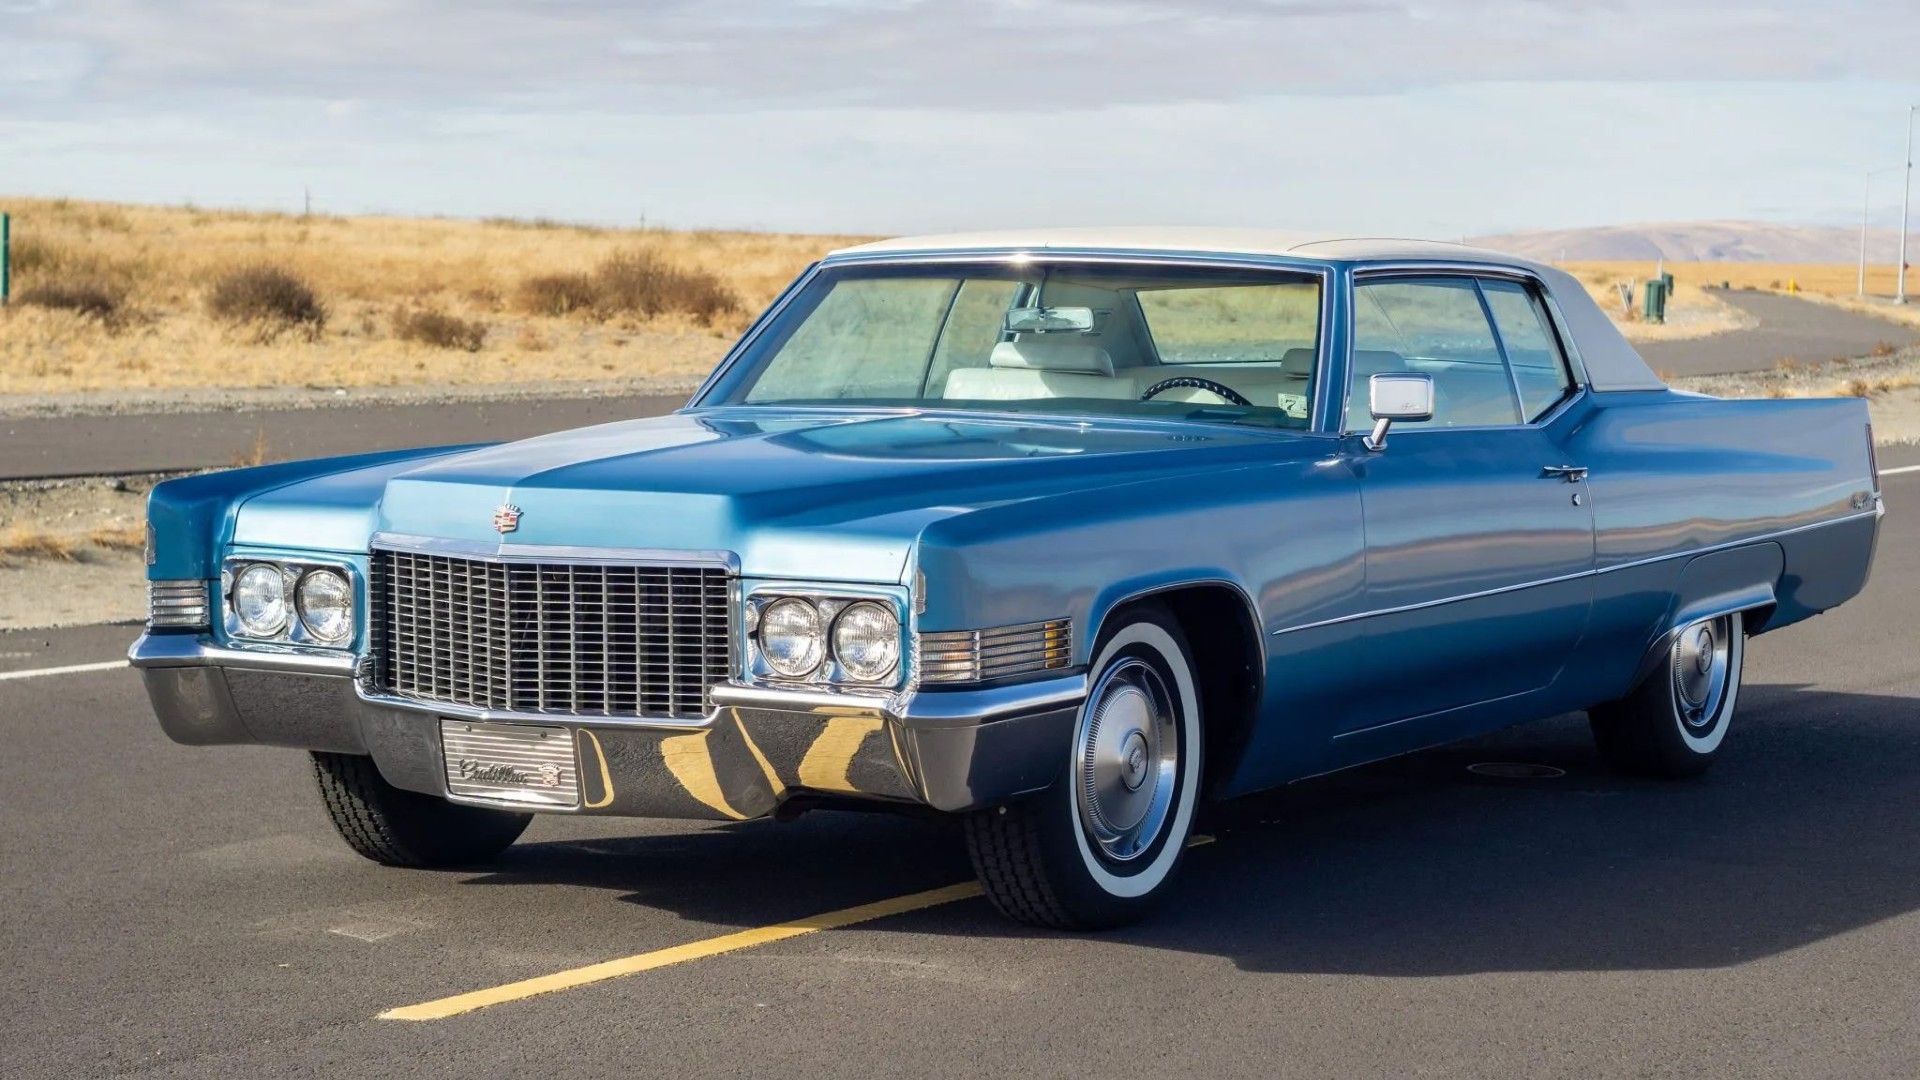 10 Things Every Enthusiast Should Know About The Cadillac DeVille